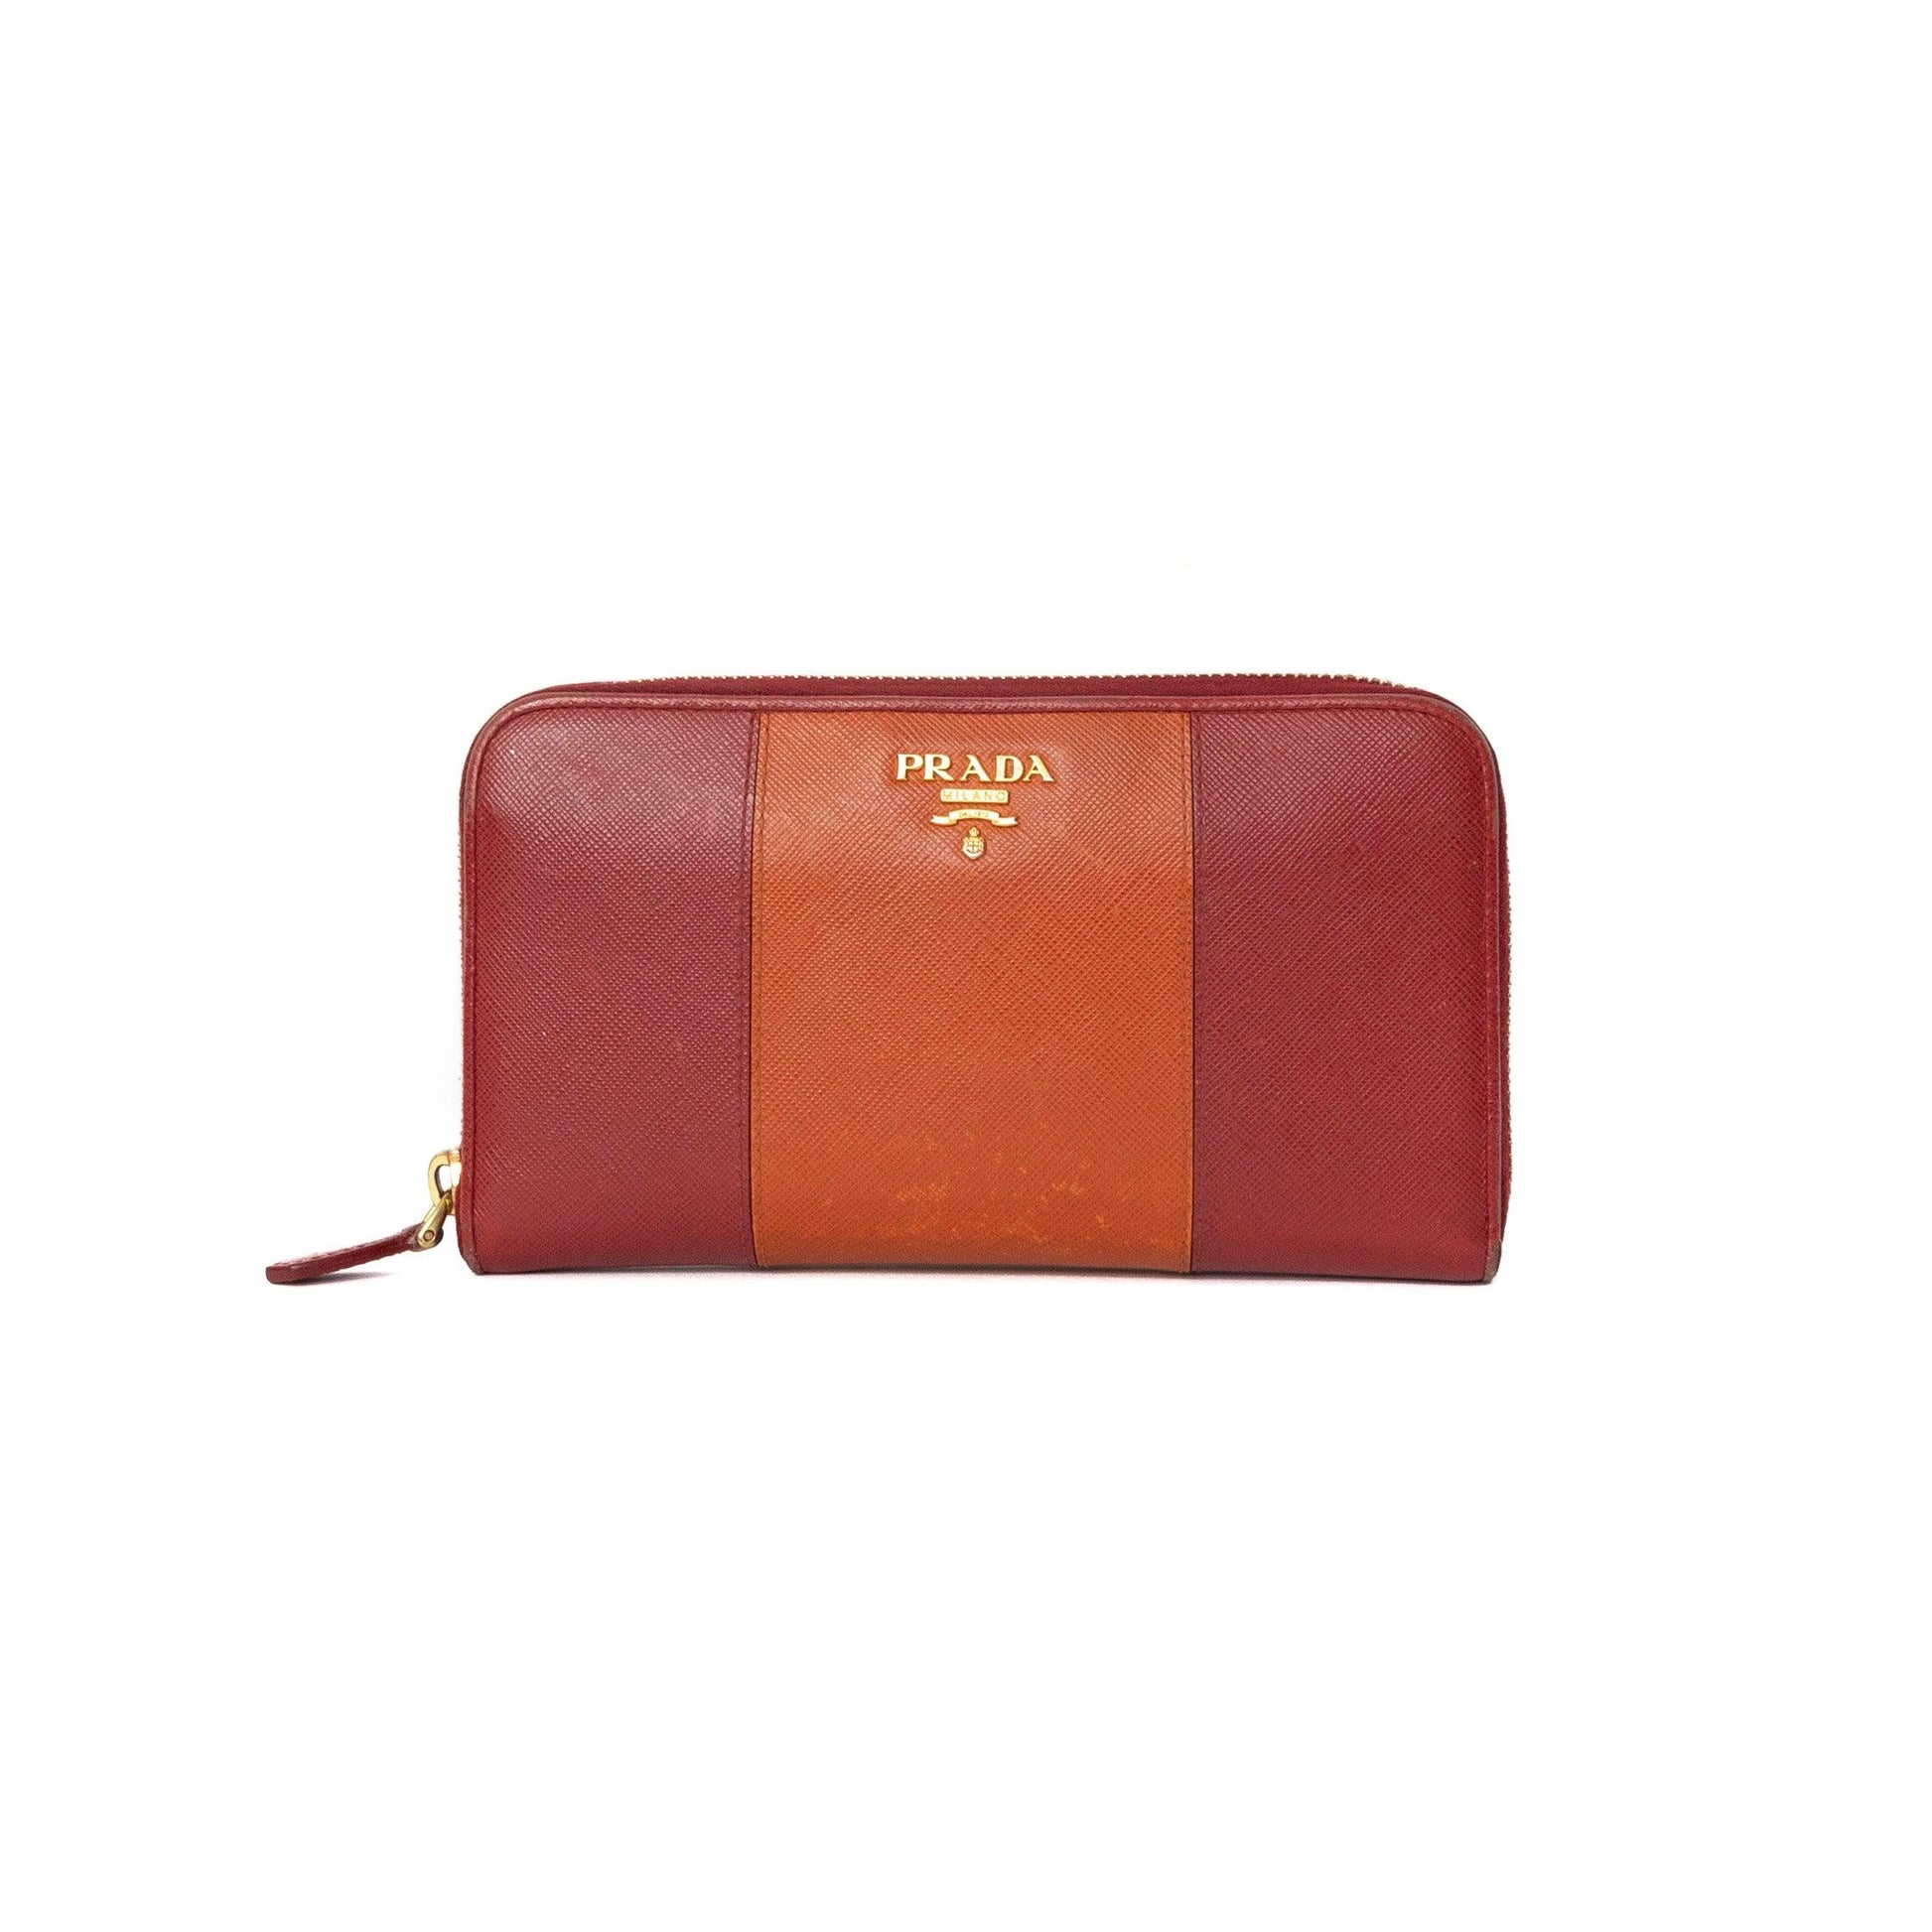 Prada Textured Leather Two-Tone Purse - Known Source